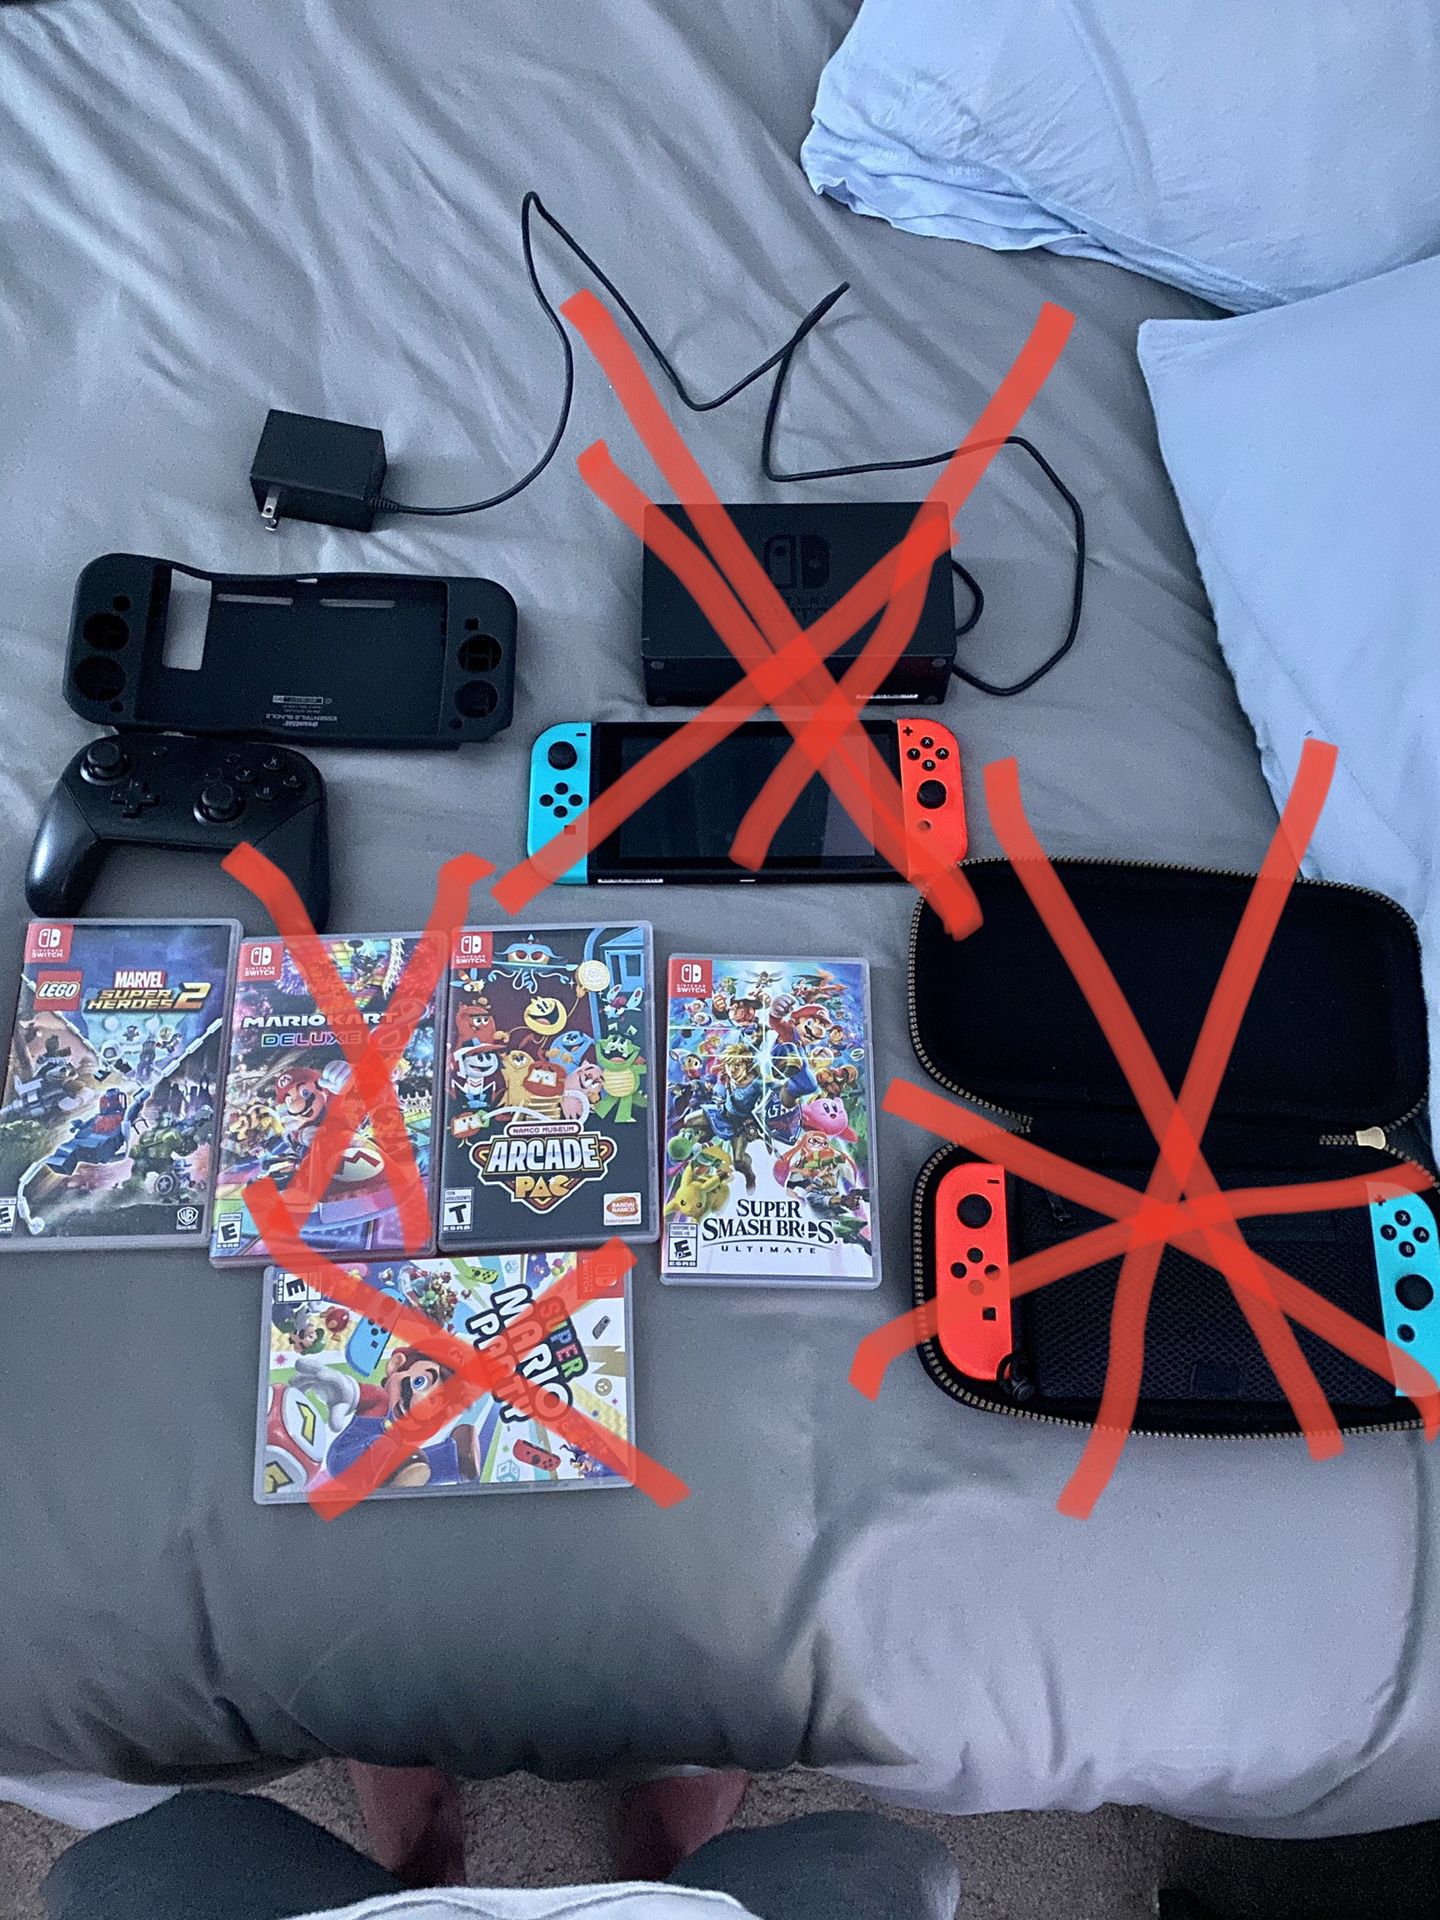 Switch games and controller